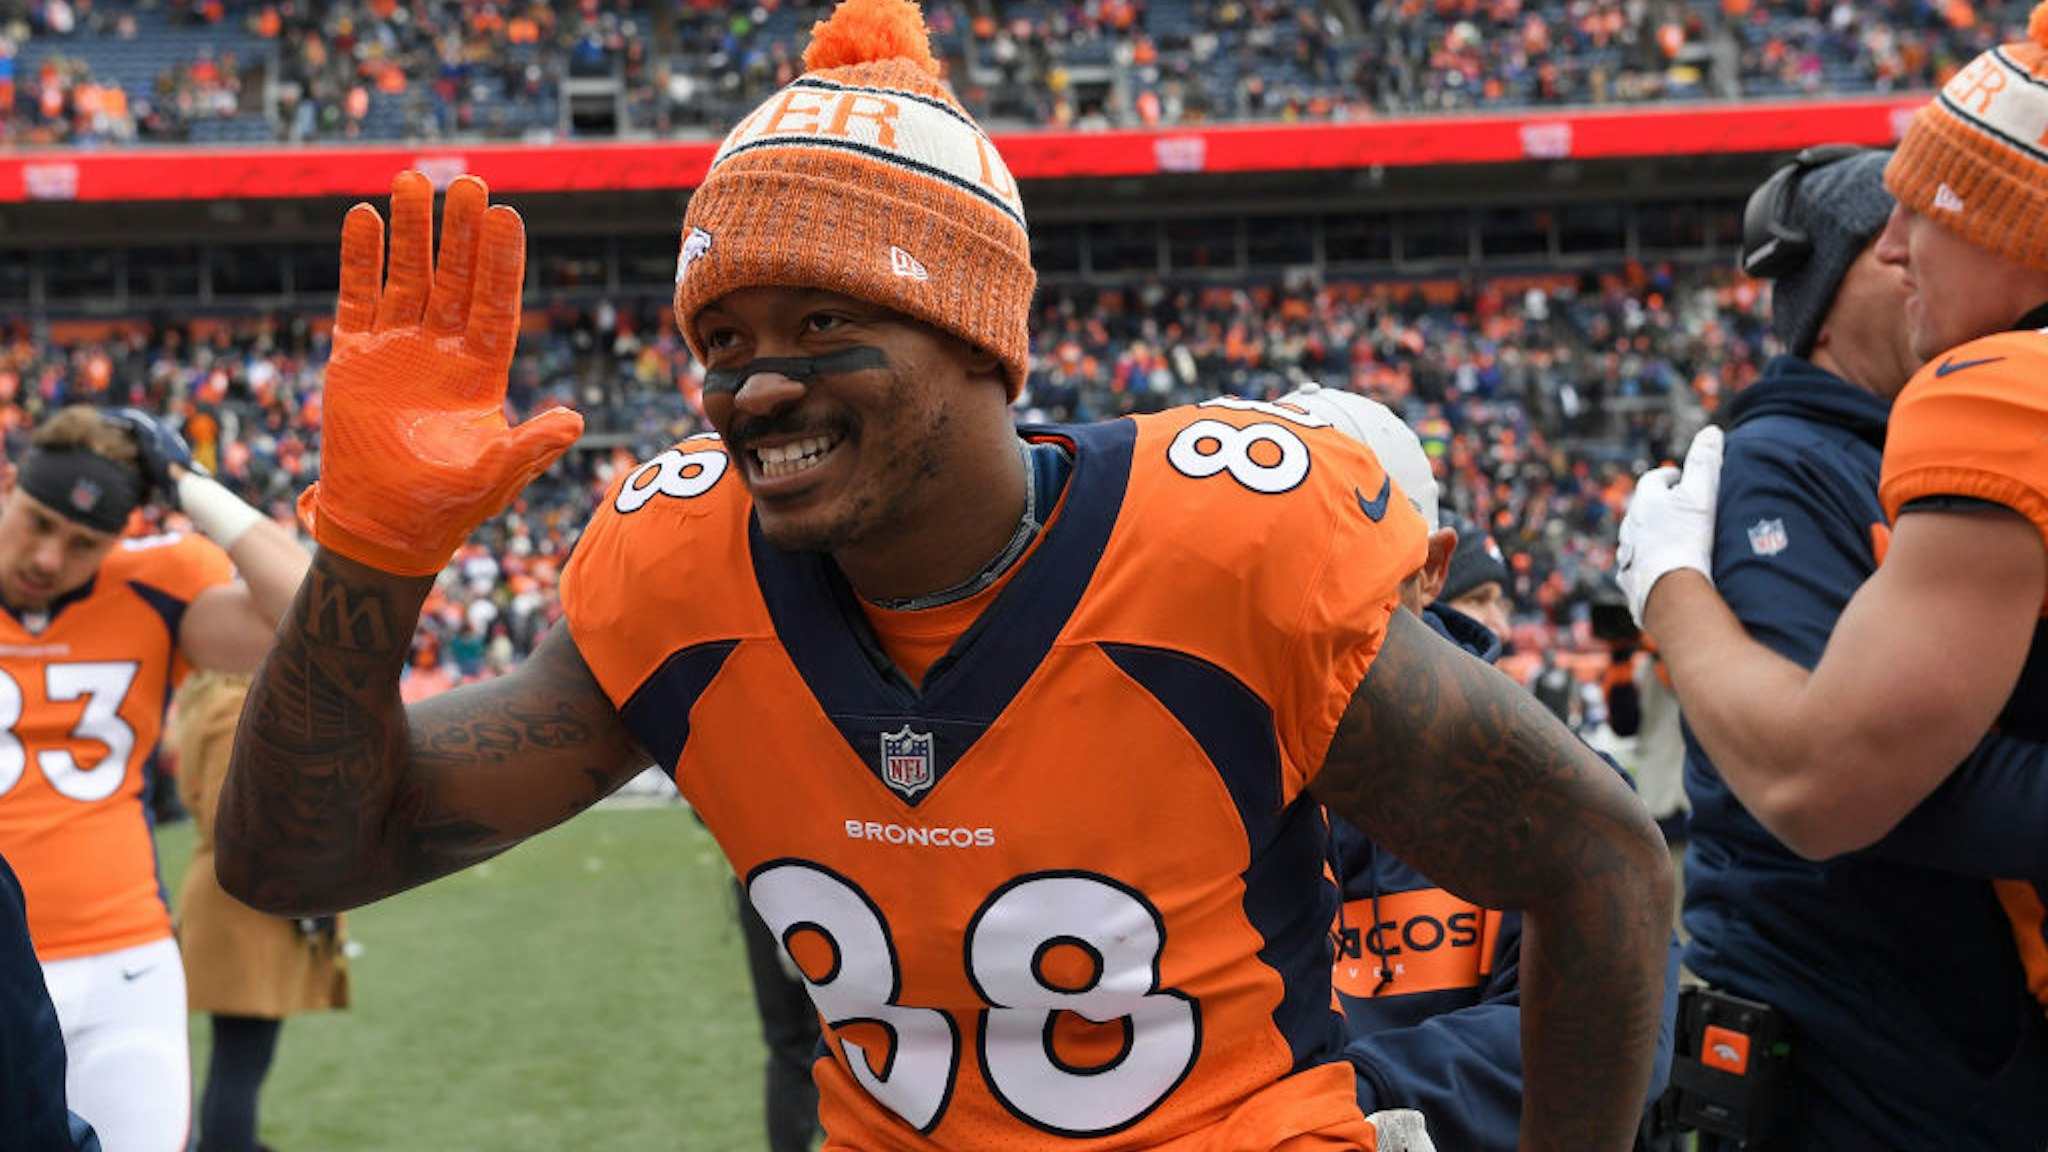 DENVER, CO - OCTOBER 14: Demaryius Thomas (88) of the Denver Broncos before the game against the Los Angeles Rams. The Denver Broncos hosted the Los Angelos Rams at Broncos Stadium at Mile High in Denver, Colorado on Sunday, October 14, 2018. (Photo by Joe Amon/The Denver Post via Getty Images)